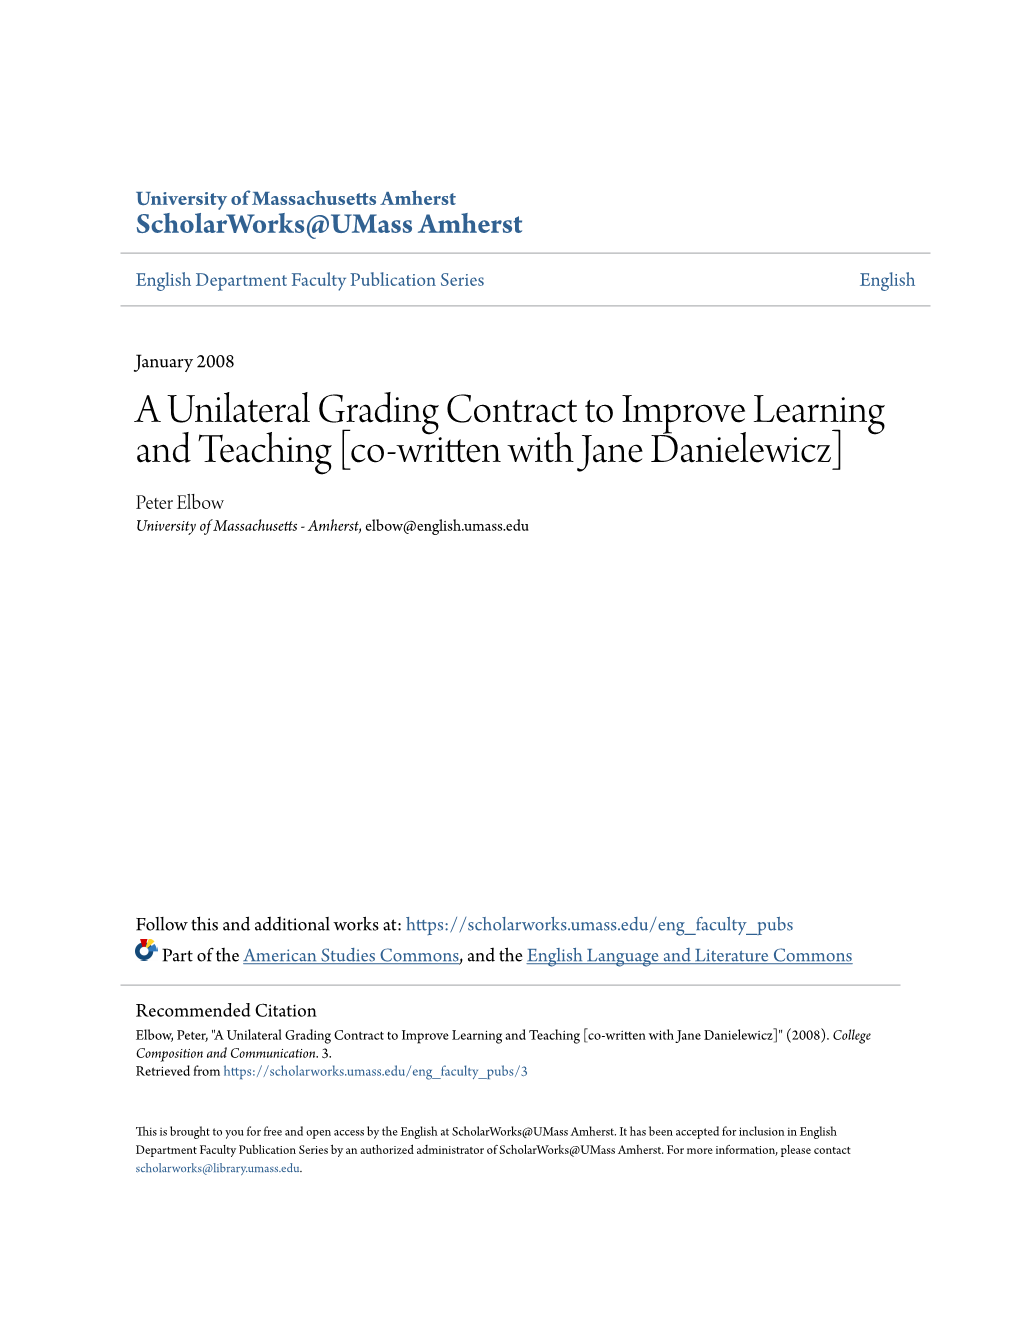 A Unilateral Grading Contract to Improve Learning and Teaching [Co